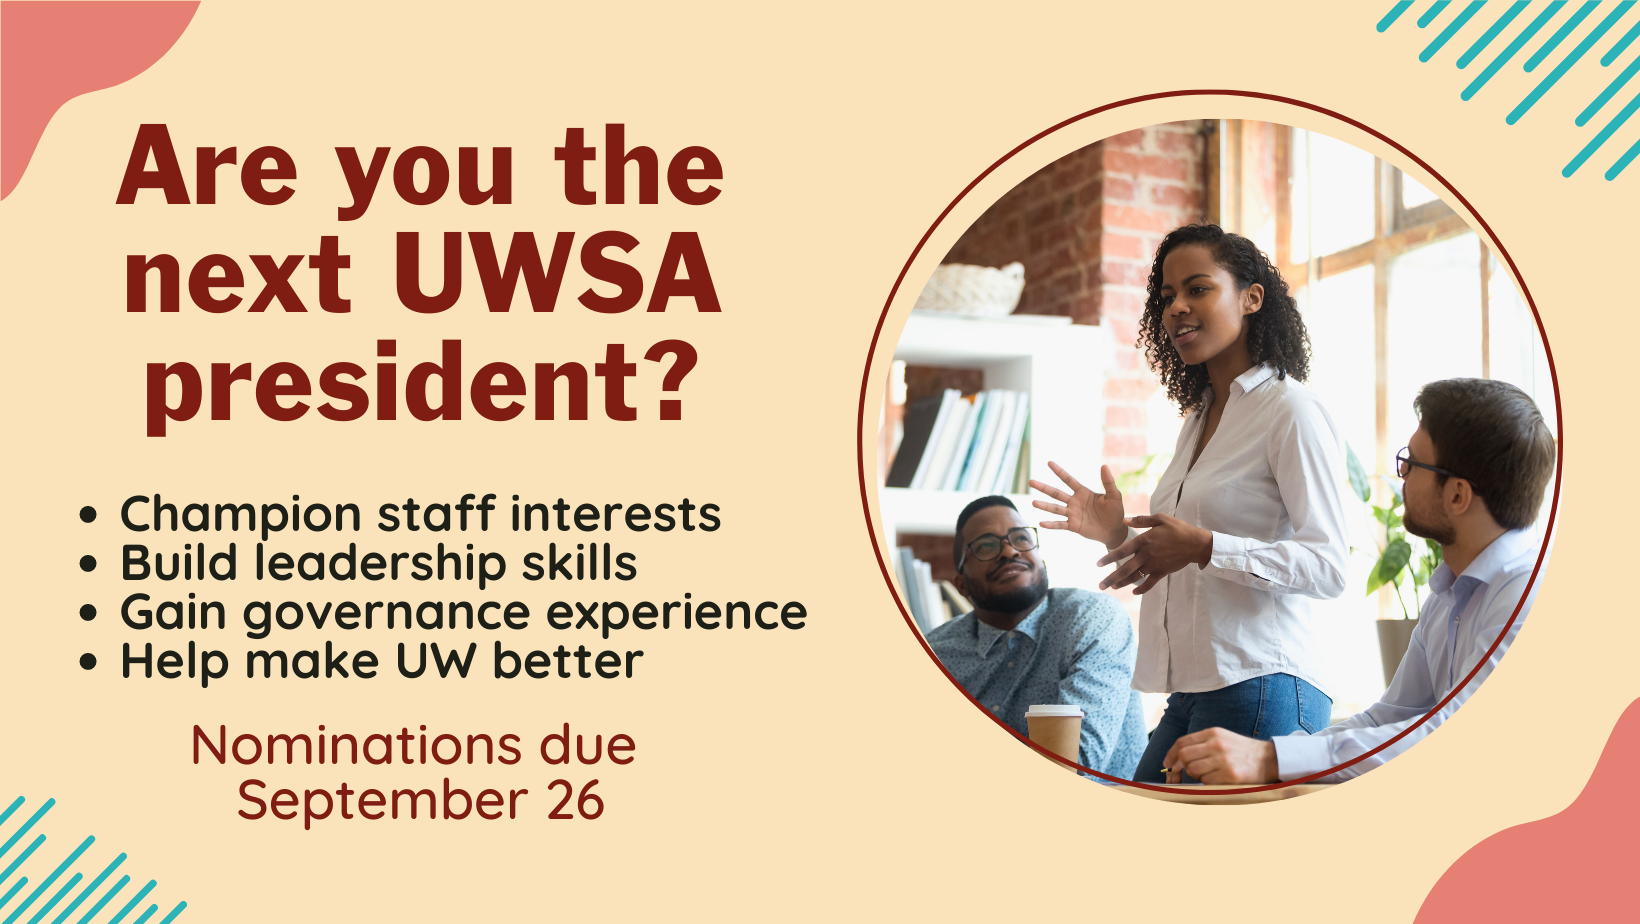 Are you the next UWSA president?